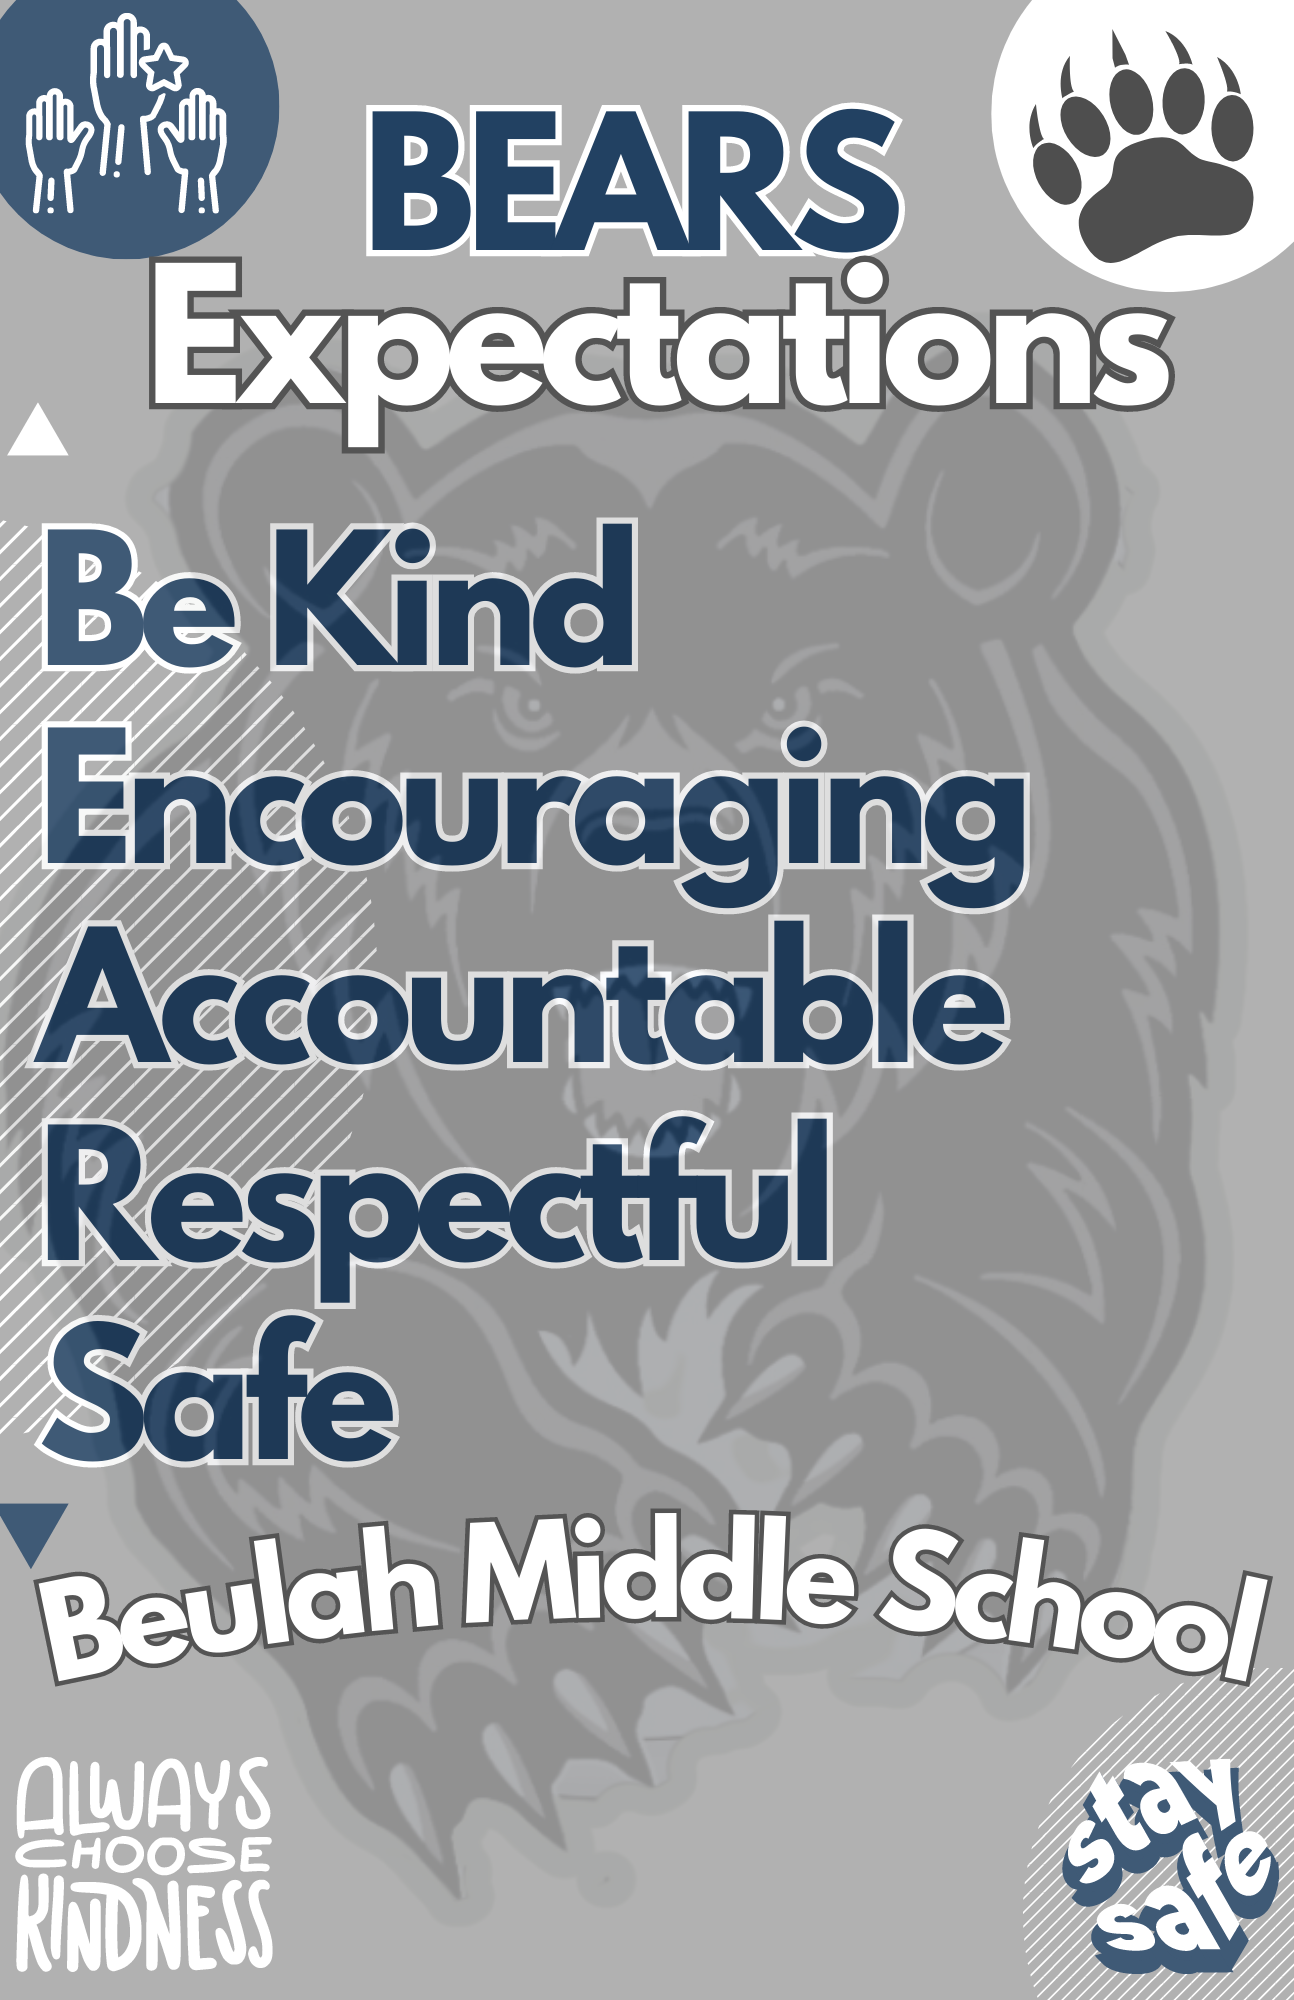 BEARS Expectations poster